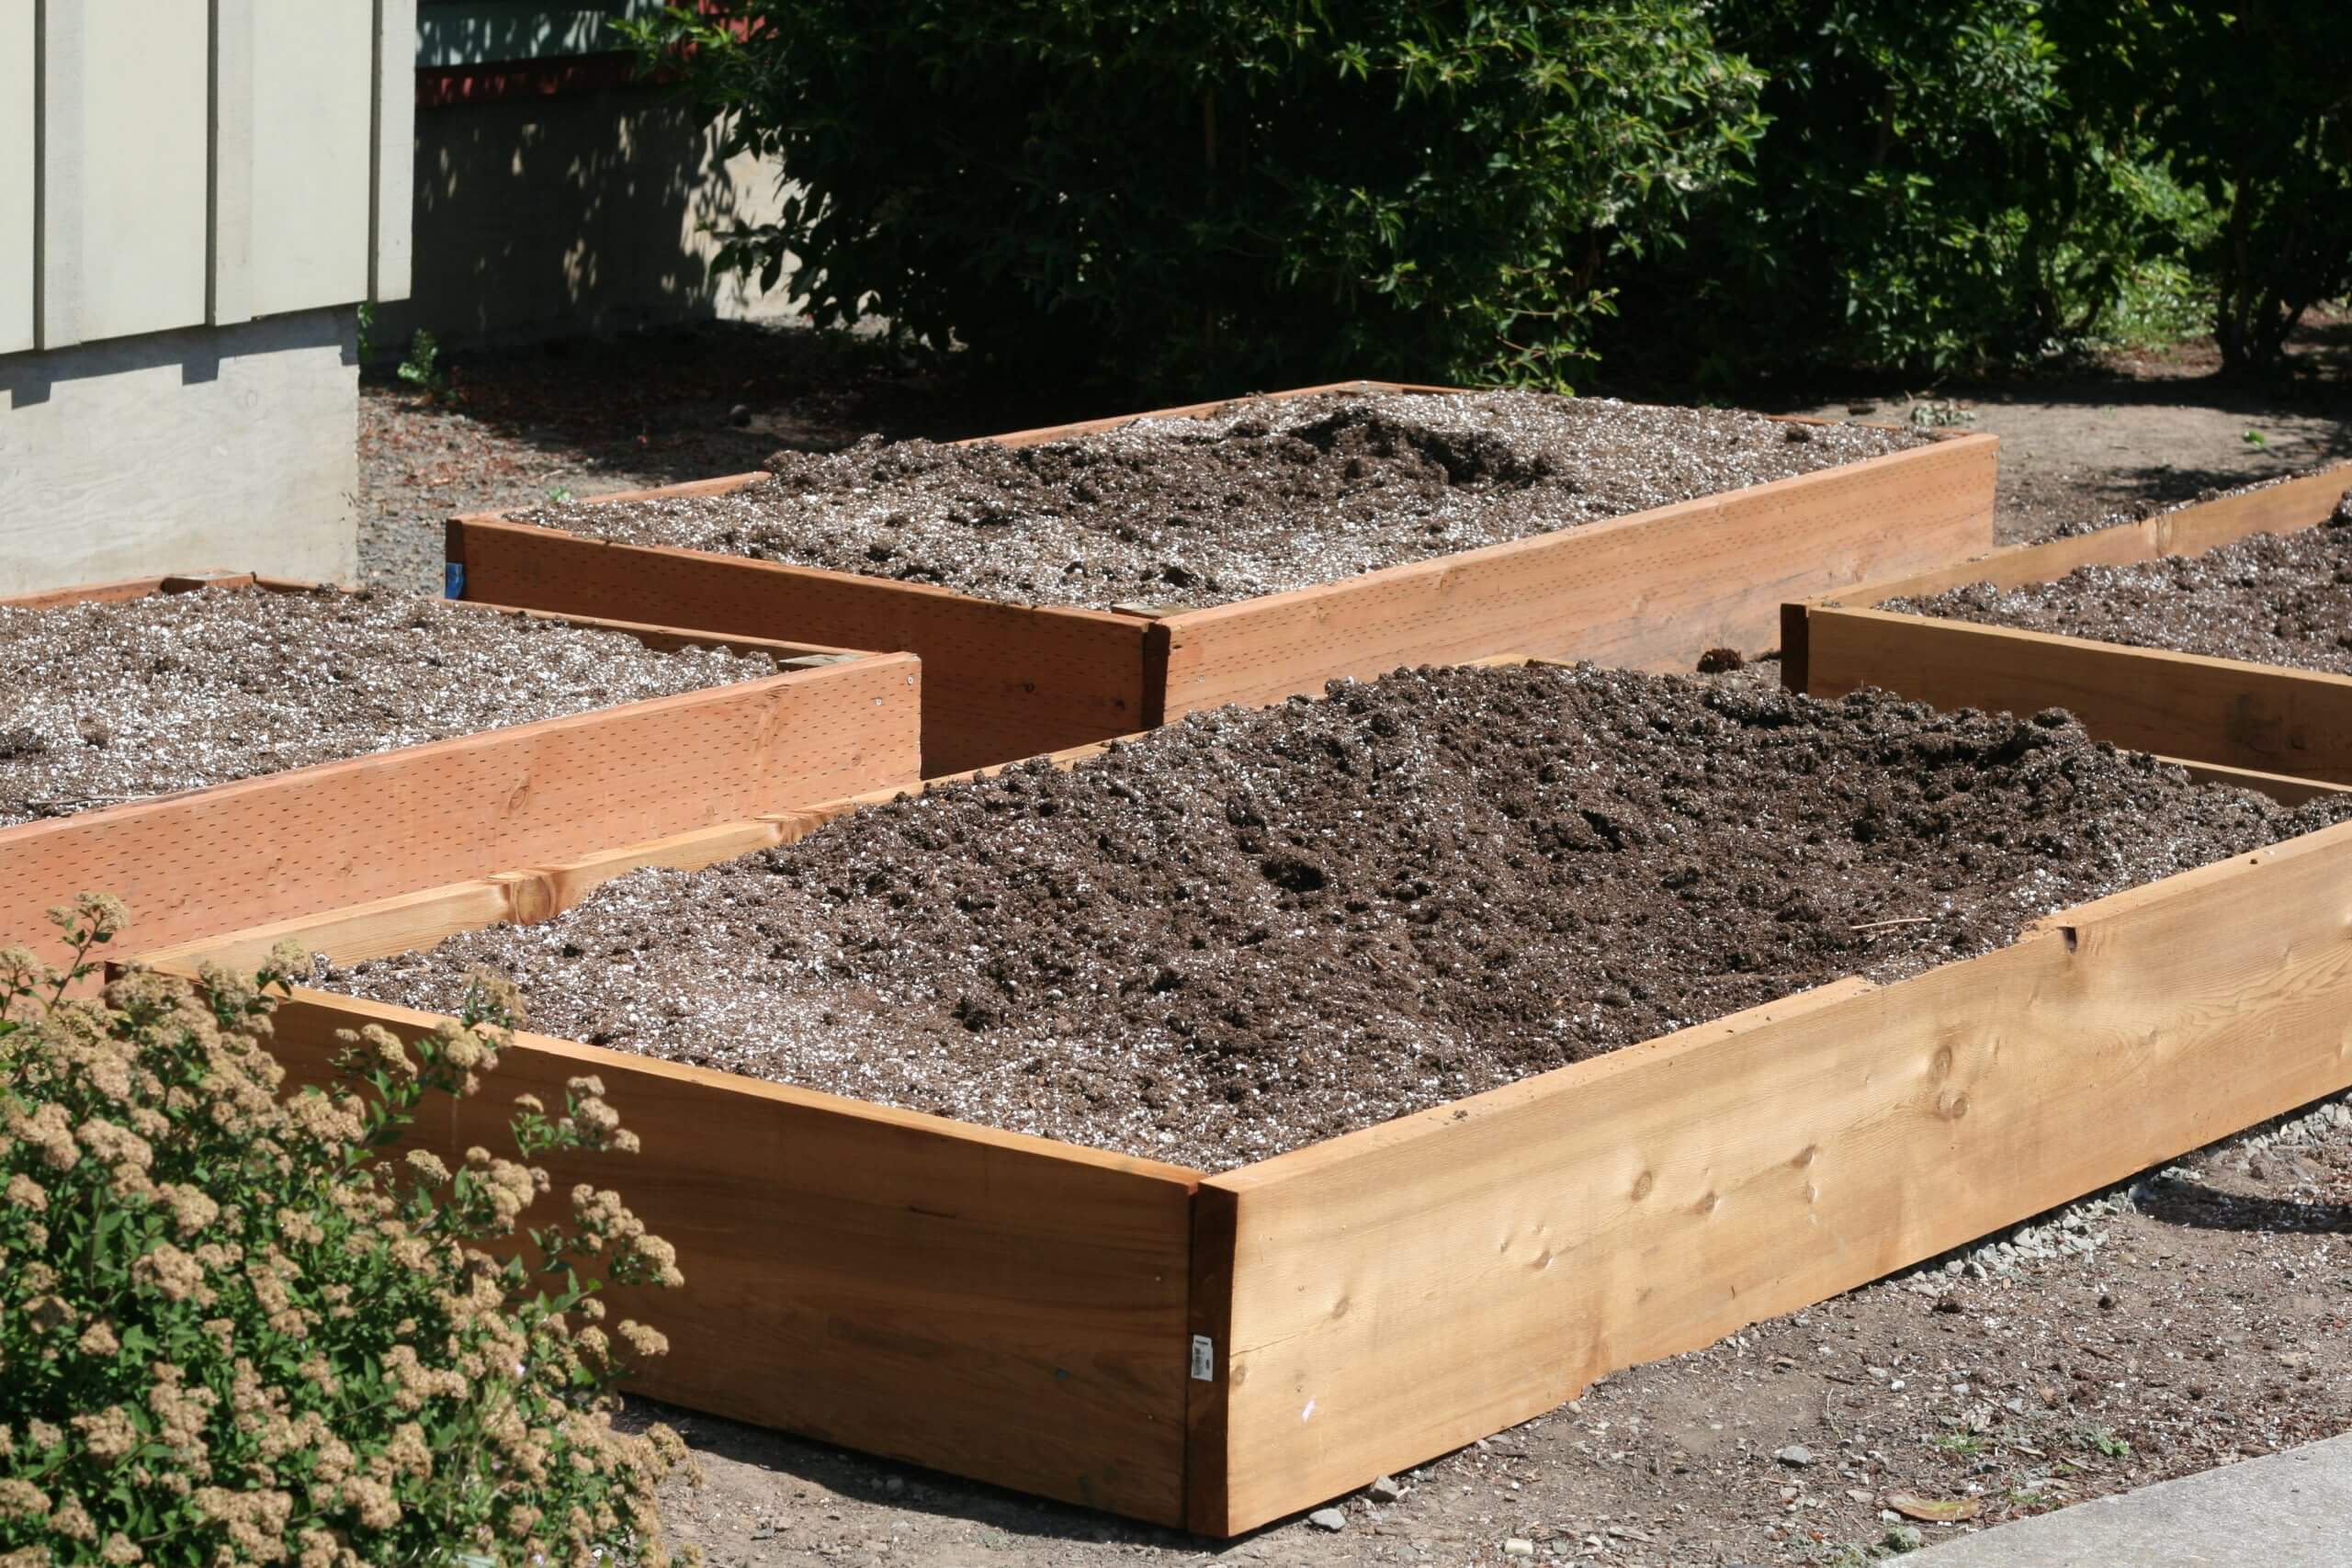 Donated Planters with Black Gold Soil